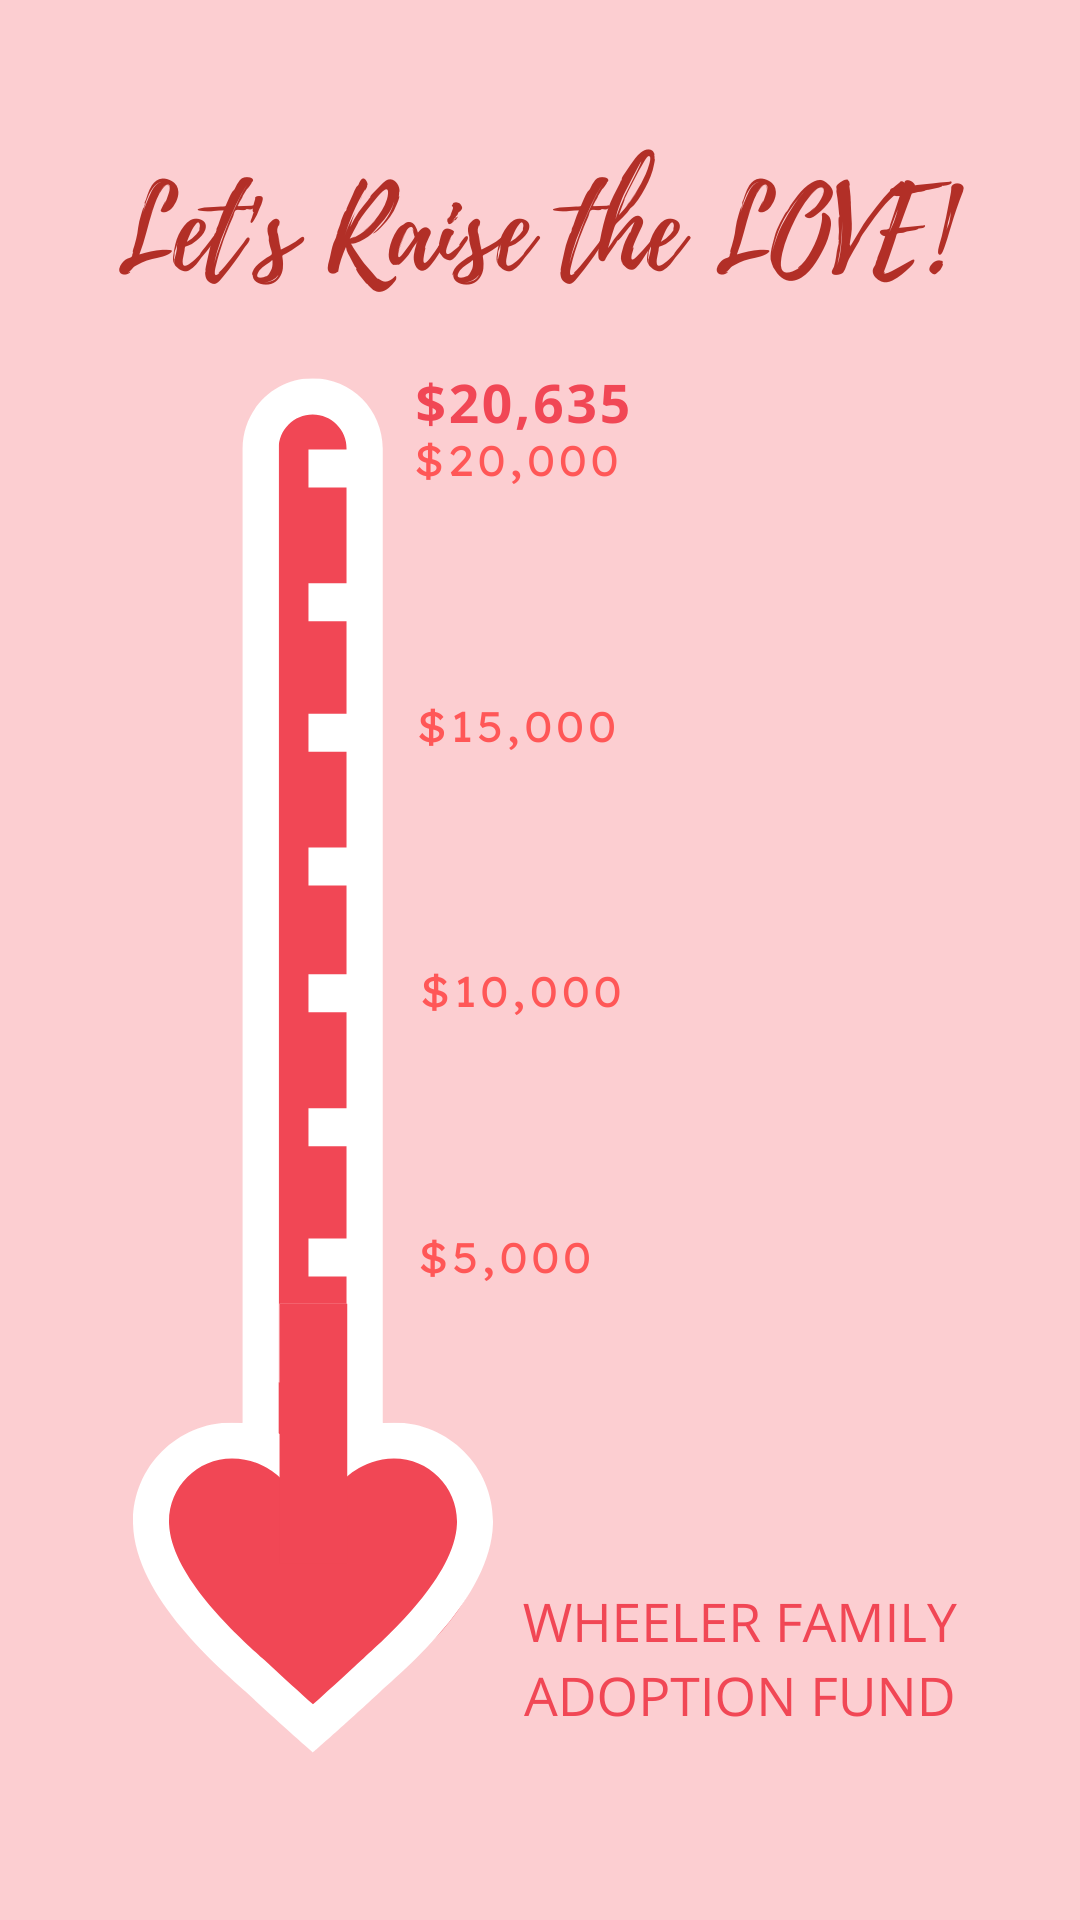 Help us Raise the LOVE! Thermometer showing fundraising level at $20,635 out of $20,000